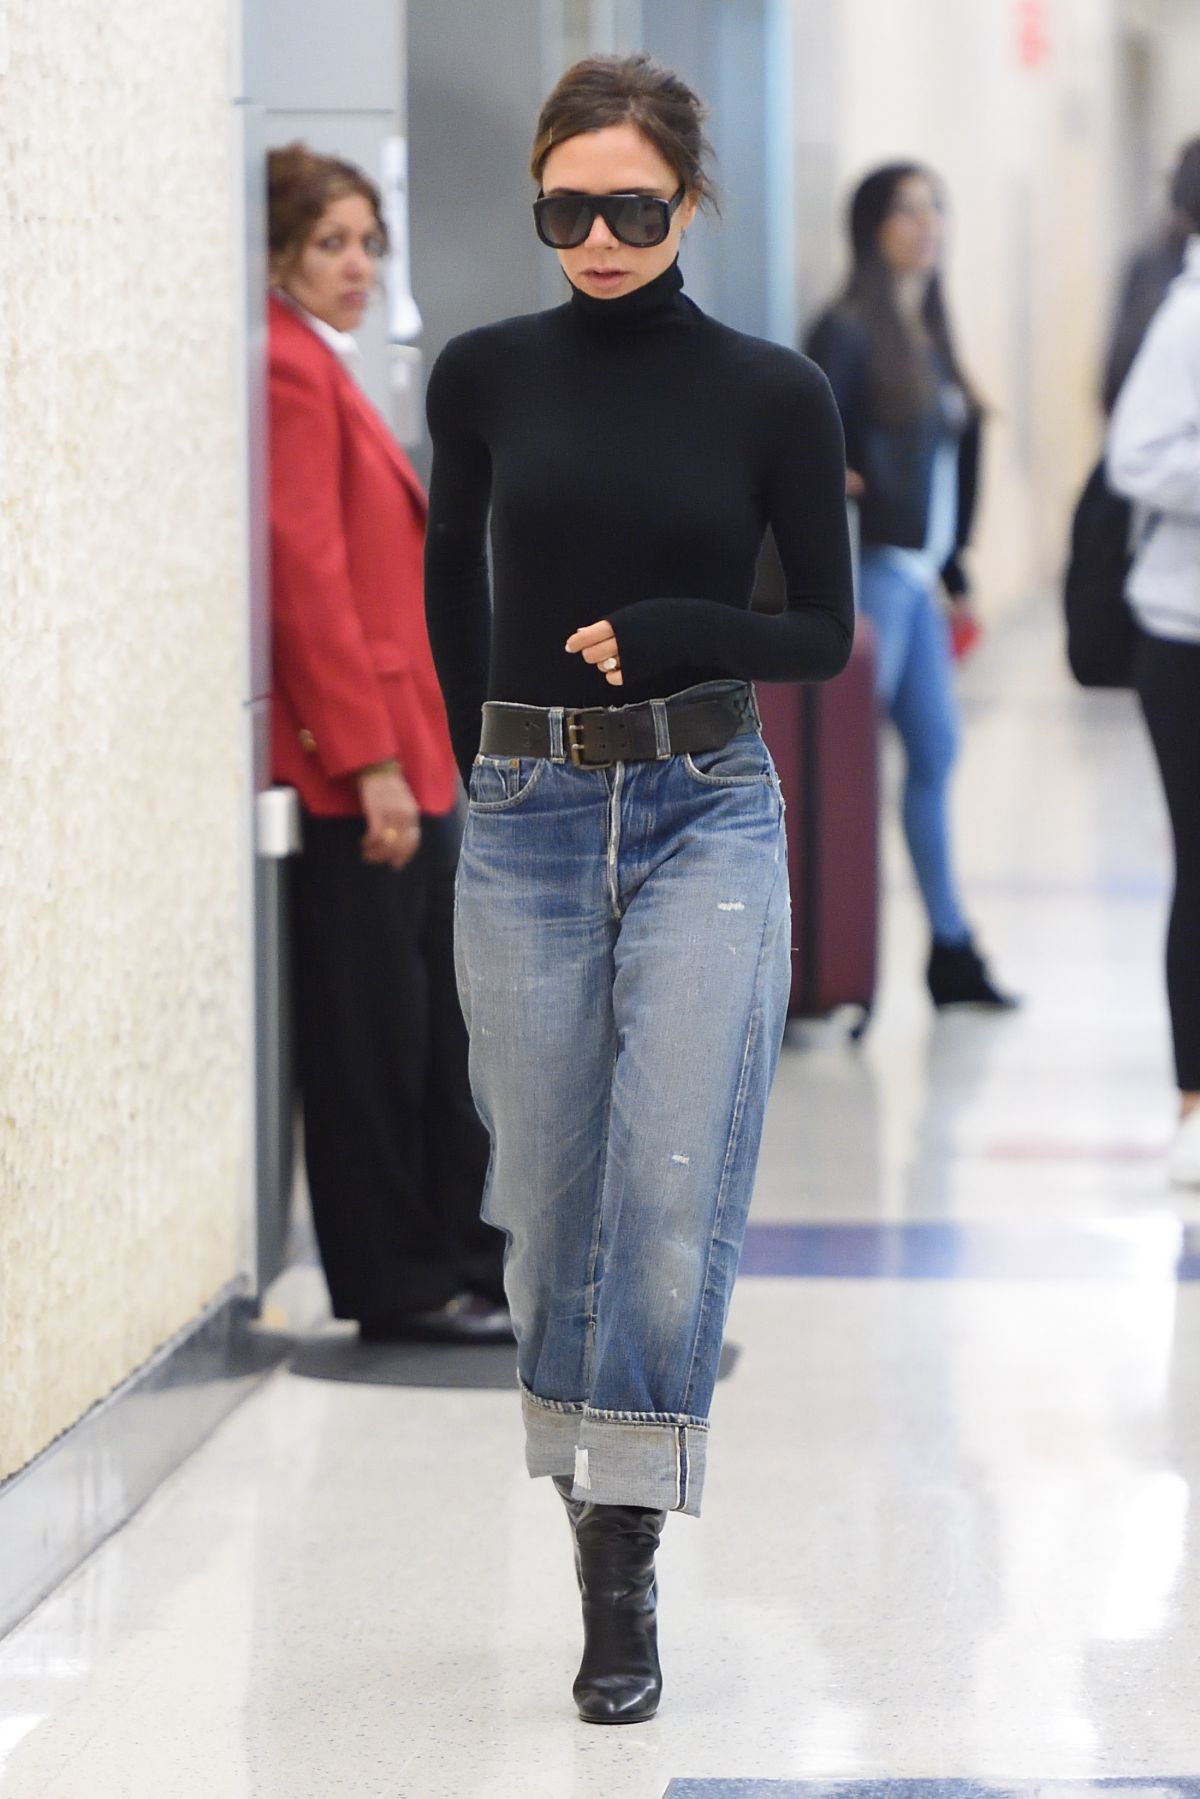 VICTORIA BECKHAM in Jeans at JFK Airport in New York 10/11/2017 ...